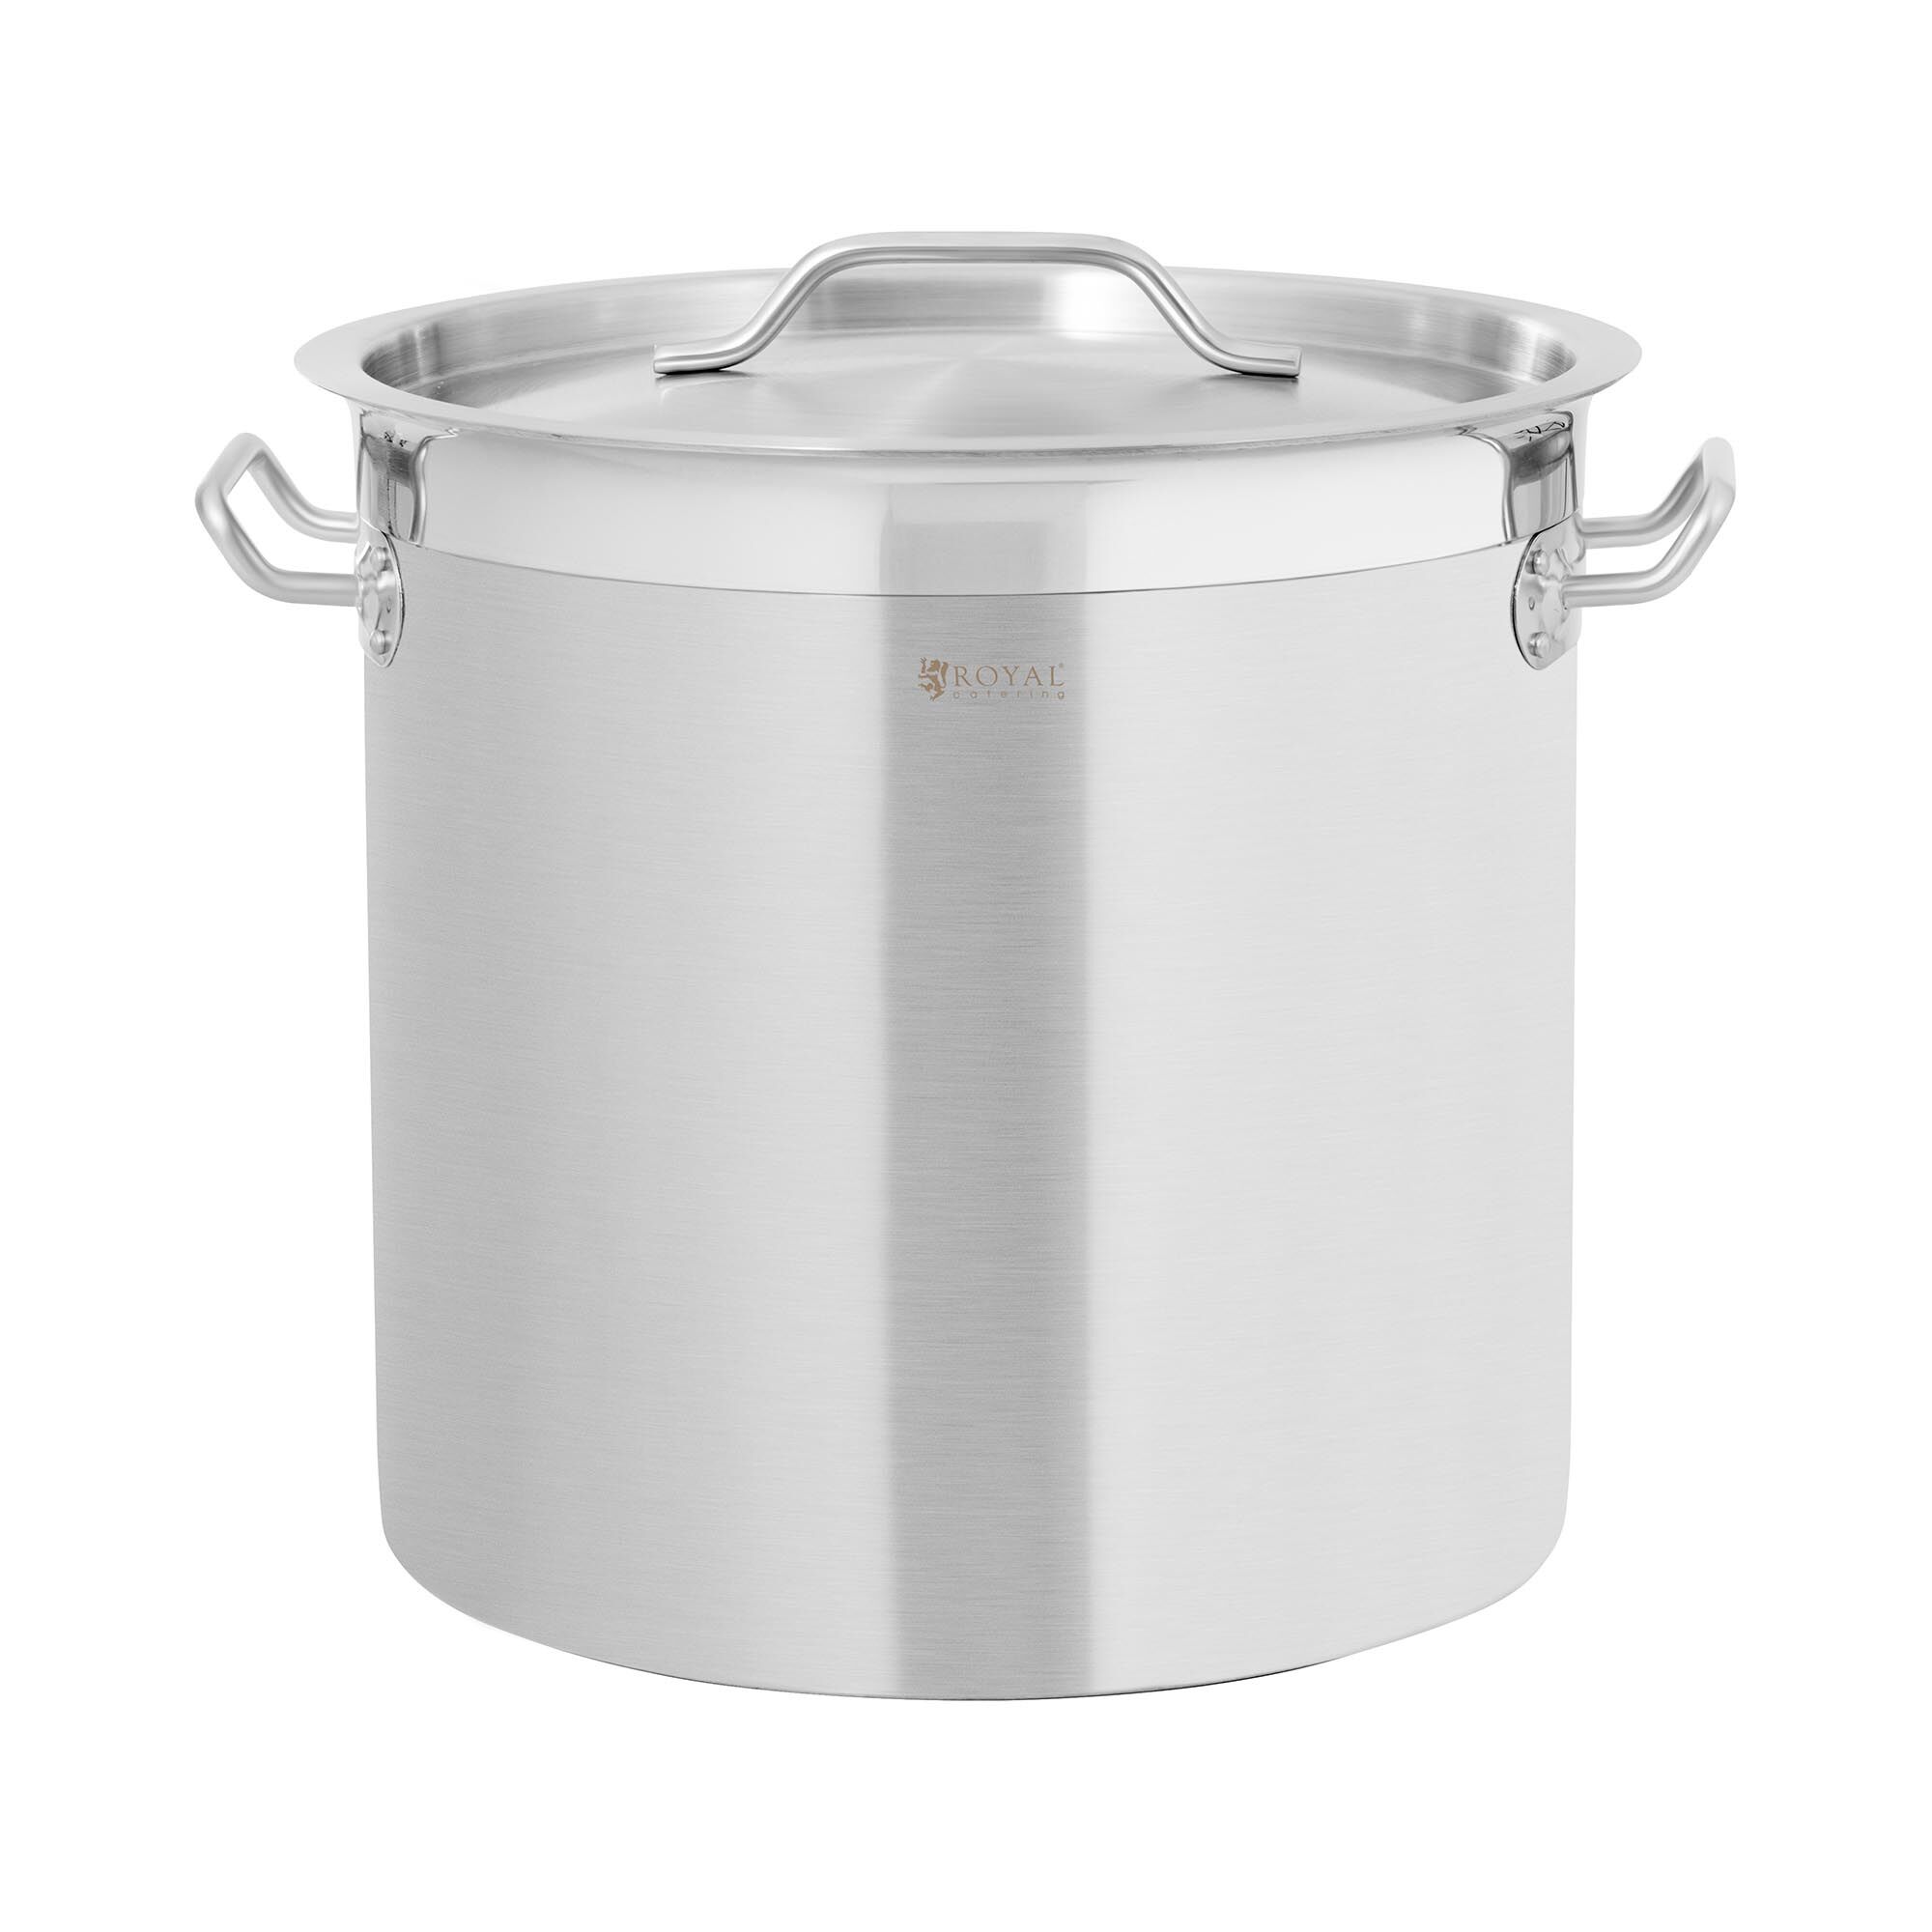 Royal Catering Induction Cooking Pot - 21 L - Royal Catering - 300 mm